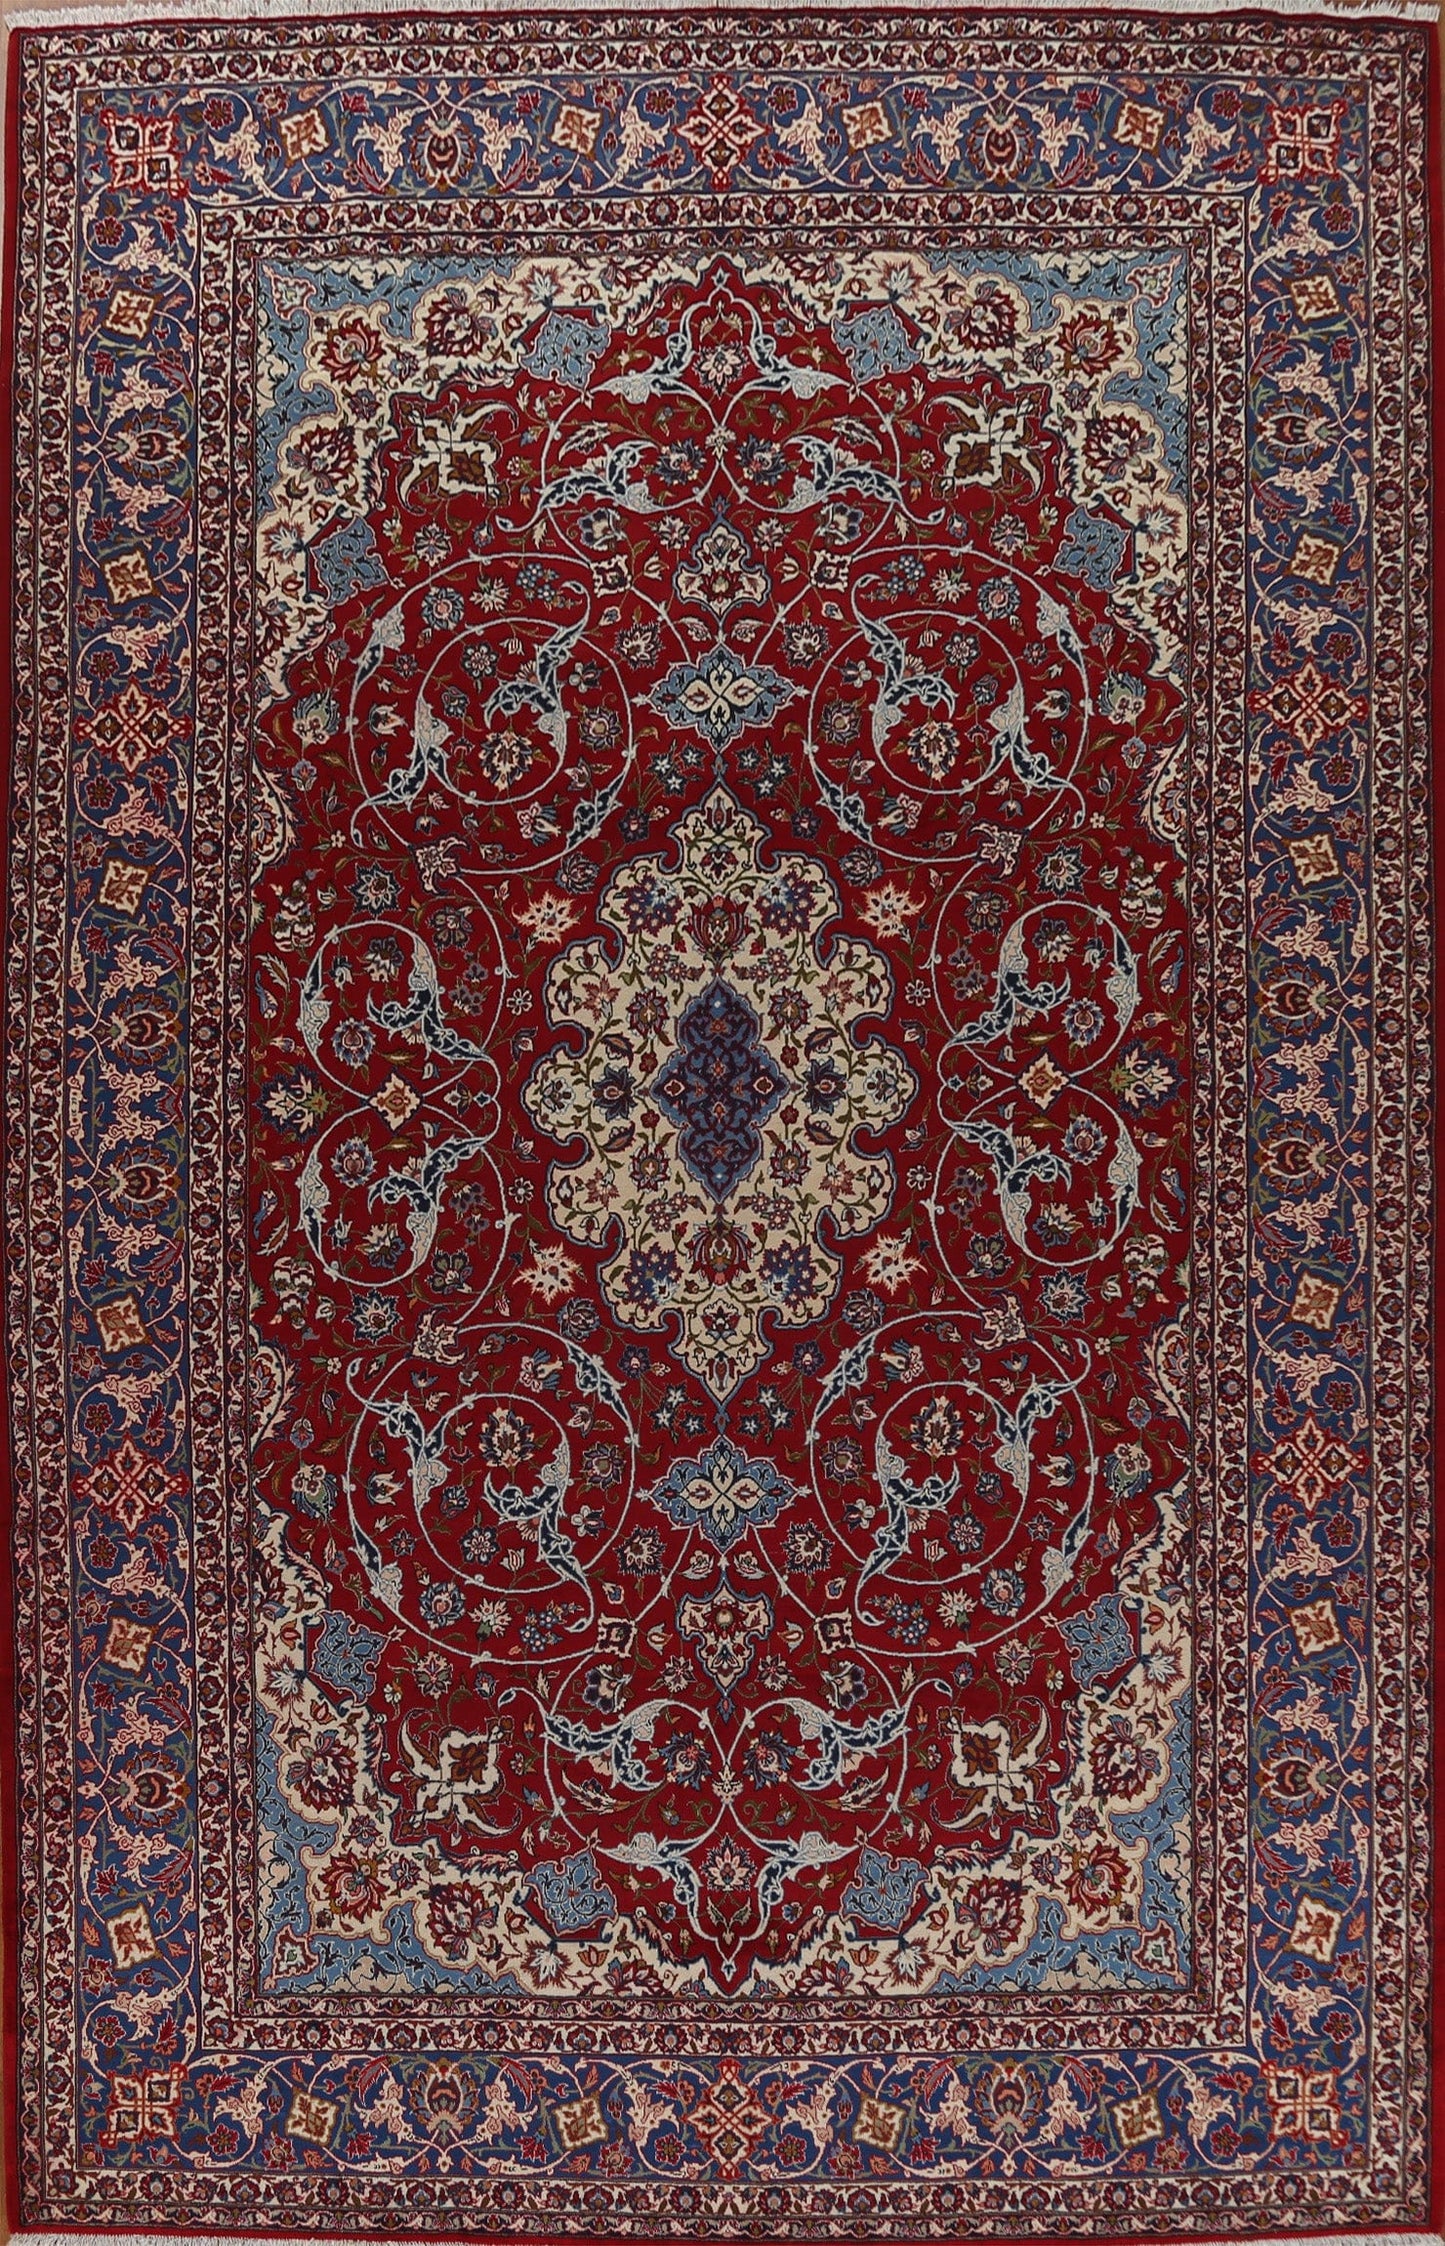 Vegetable Dye Red Isfahan Persian Area Rug 10x14